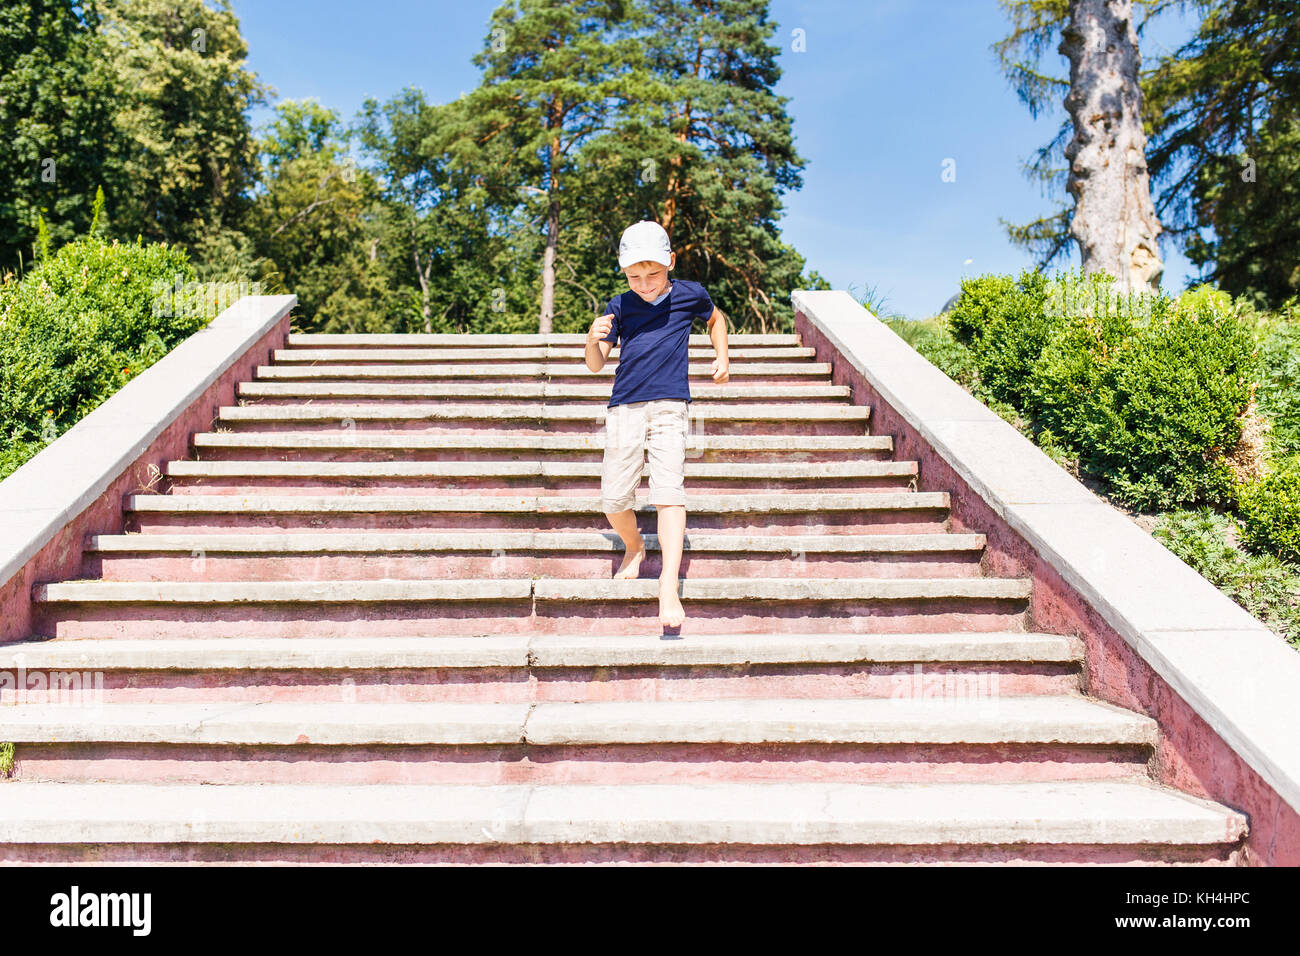 Boy going down on stairs barefoot. Concept childhood image with copy space Stock Photo